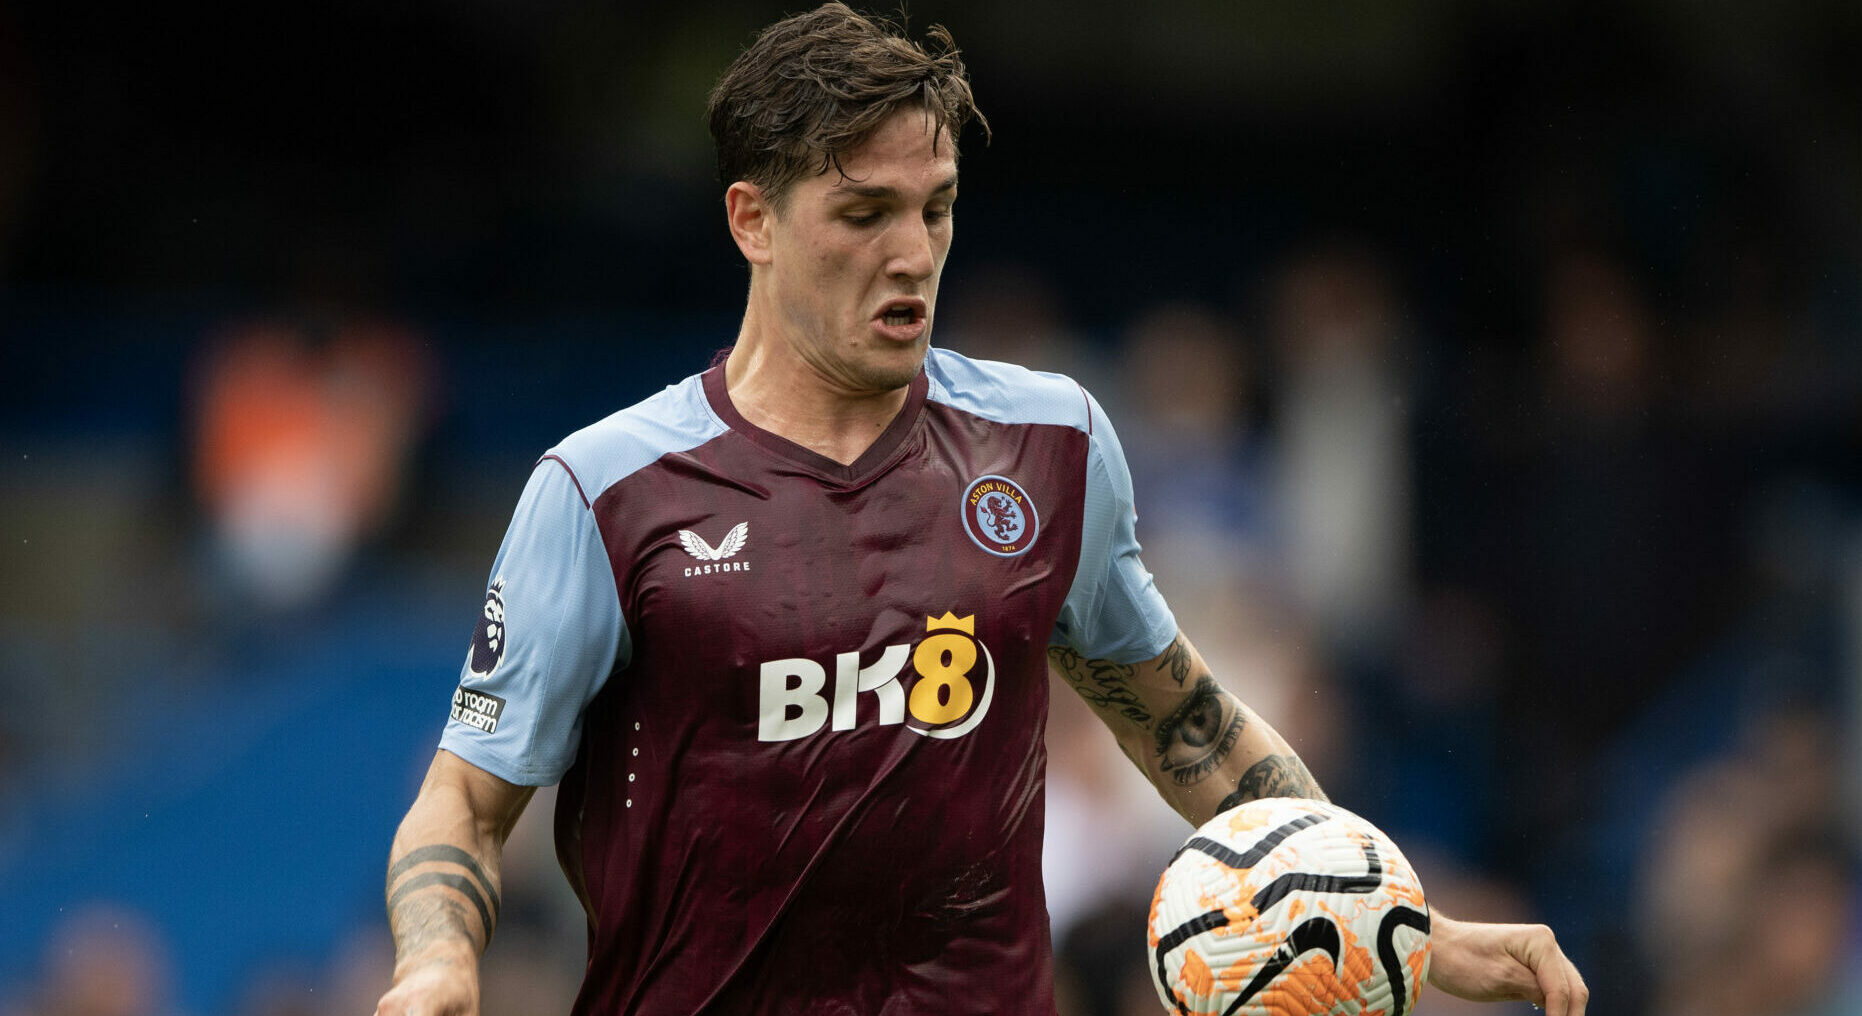 Aston Villa's Nicolo Zaniolo is likely to leave the club at the end of the season.